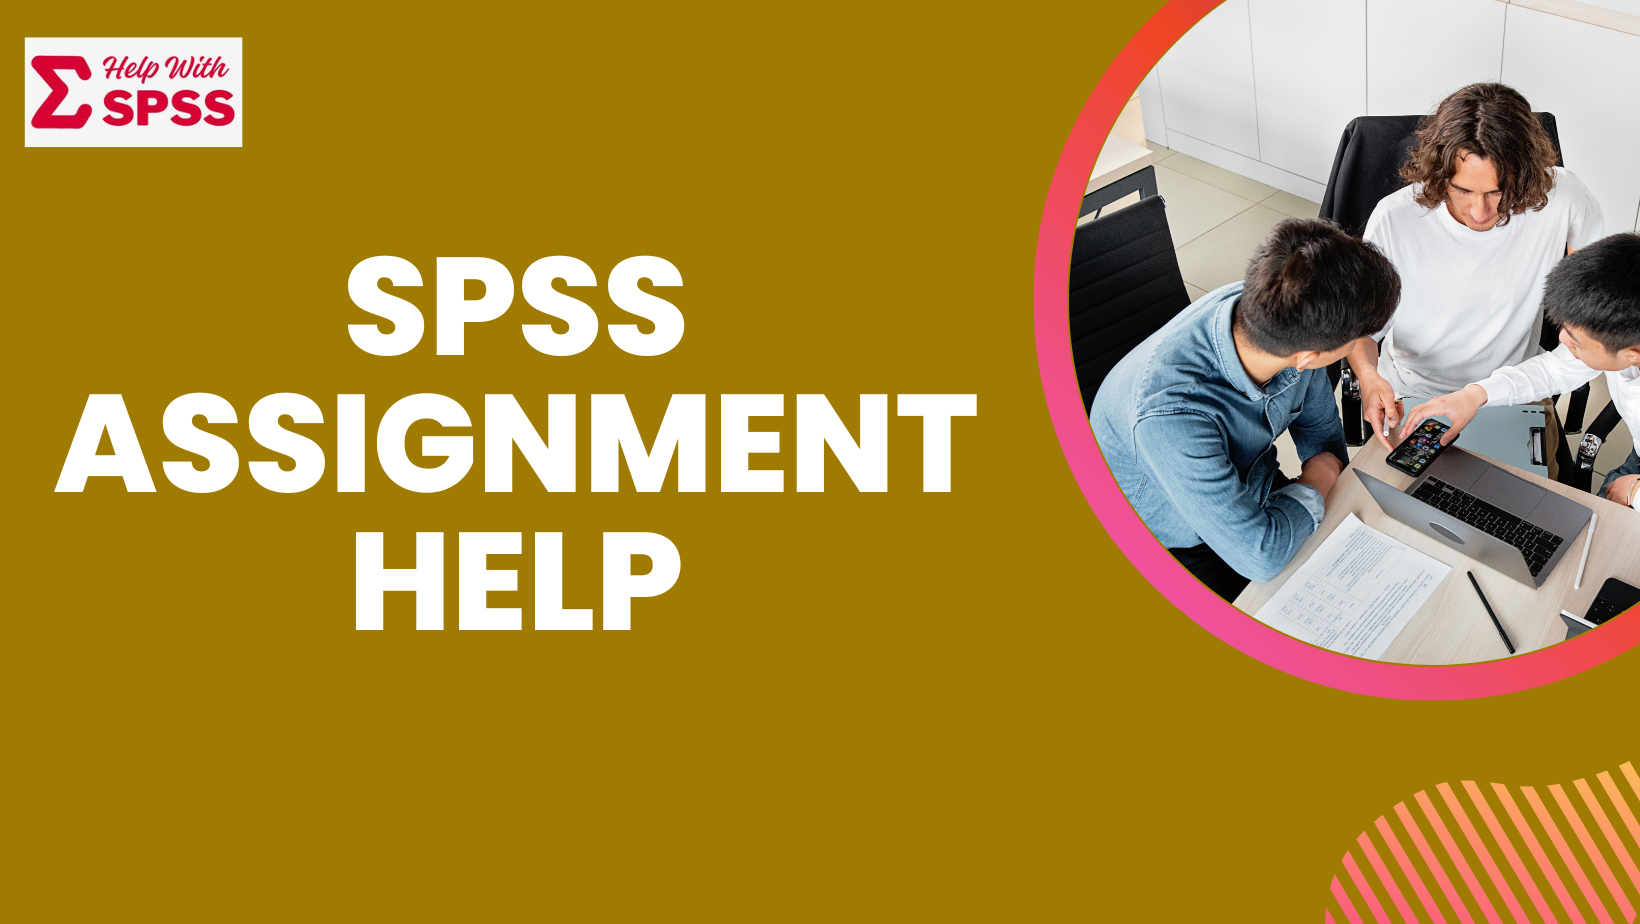 The Best SPSS Assignment Help Experts in Australia: Your Ultimate Guide